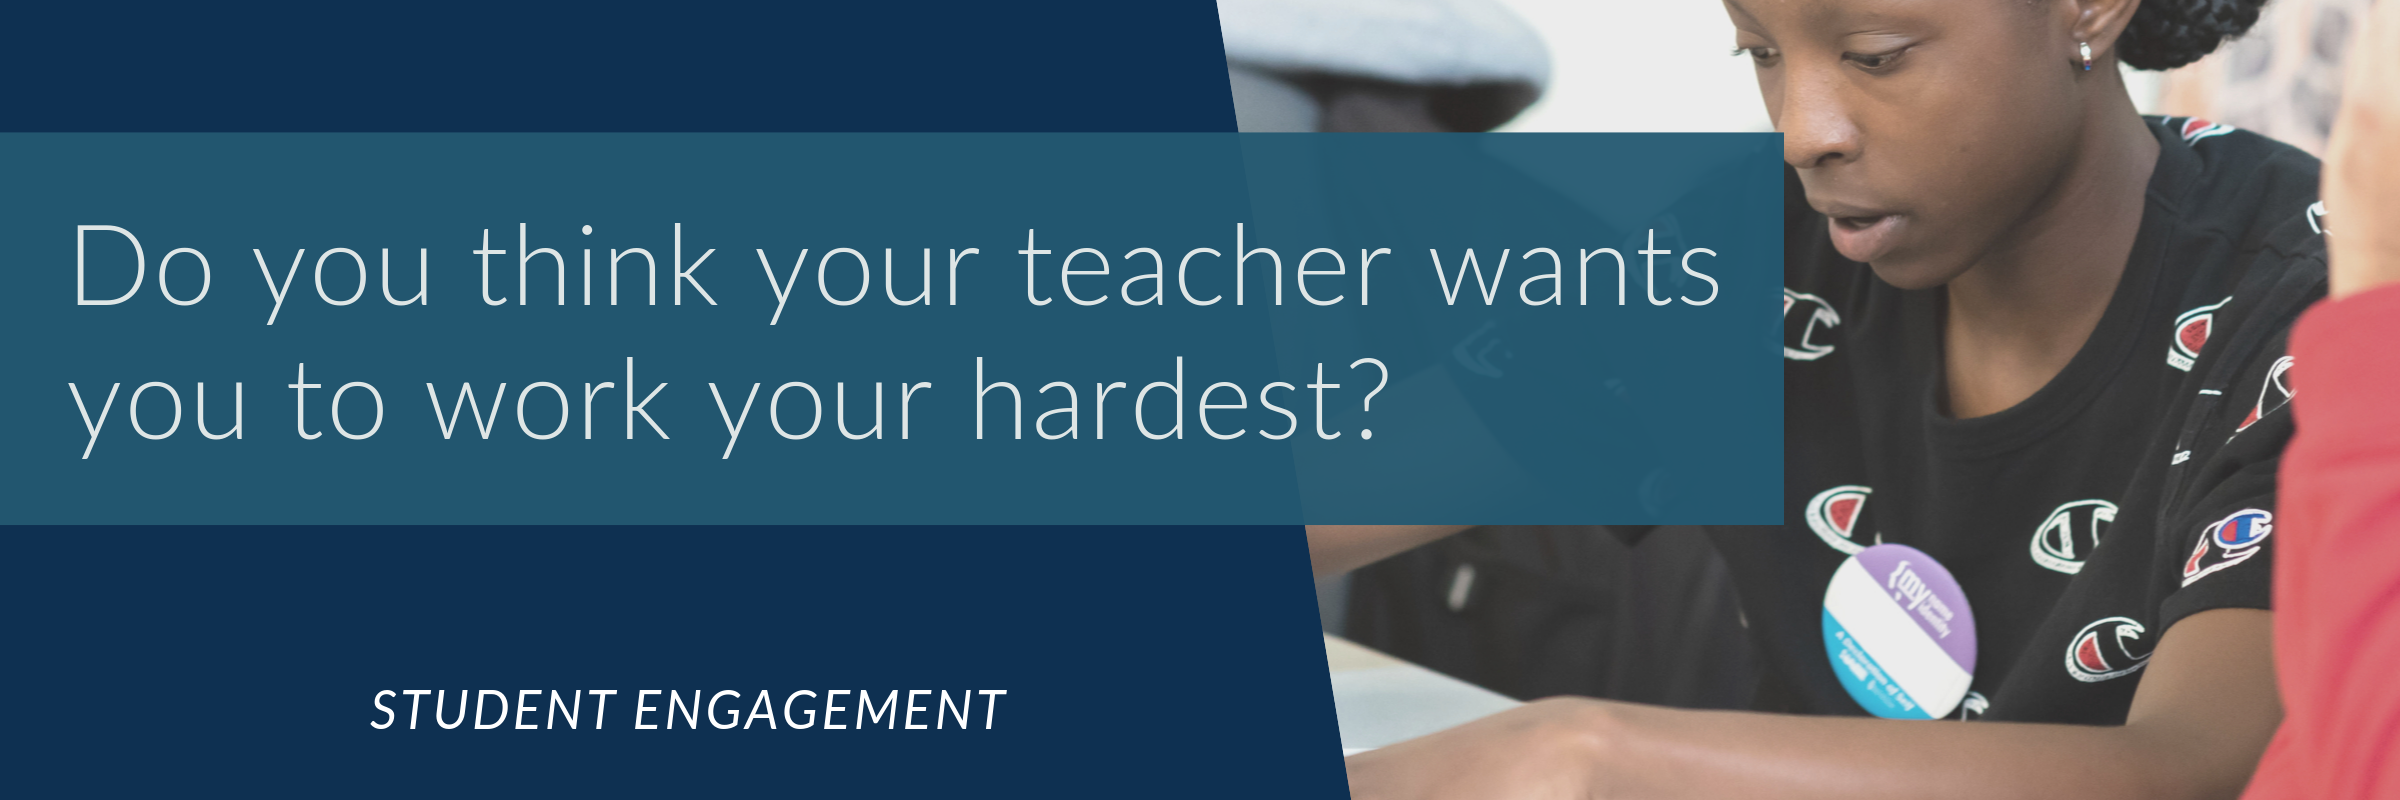 Do you think your teacher wants you to work your hardest?